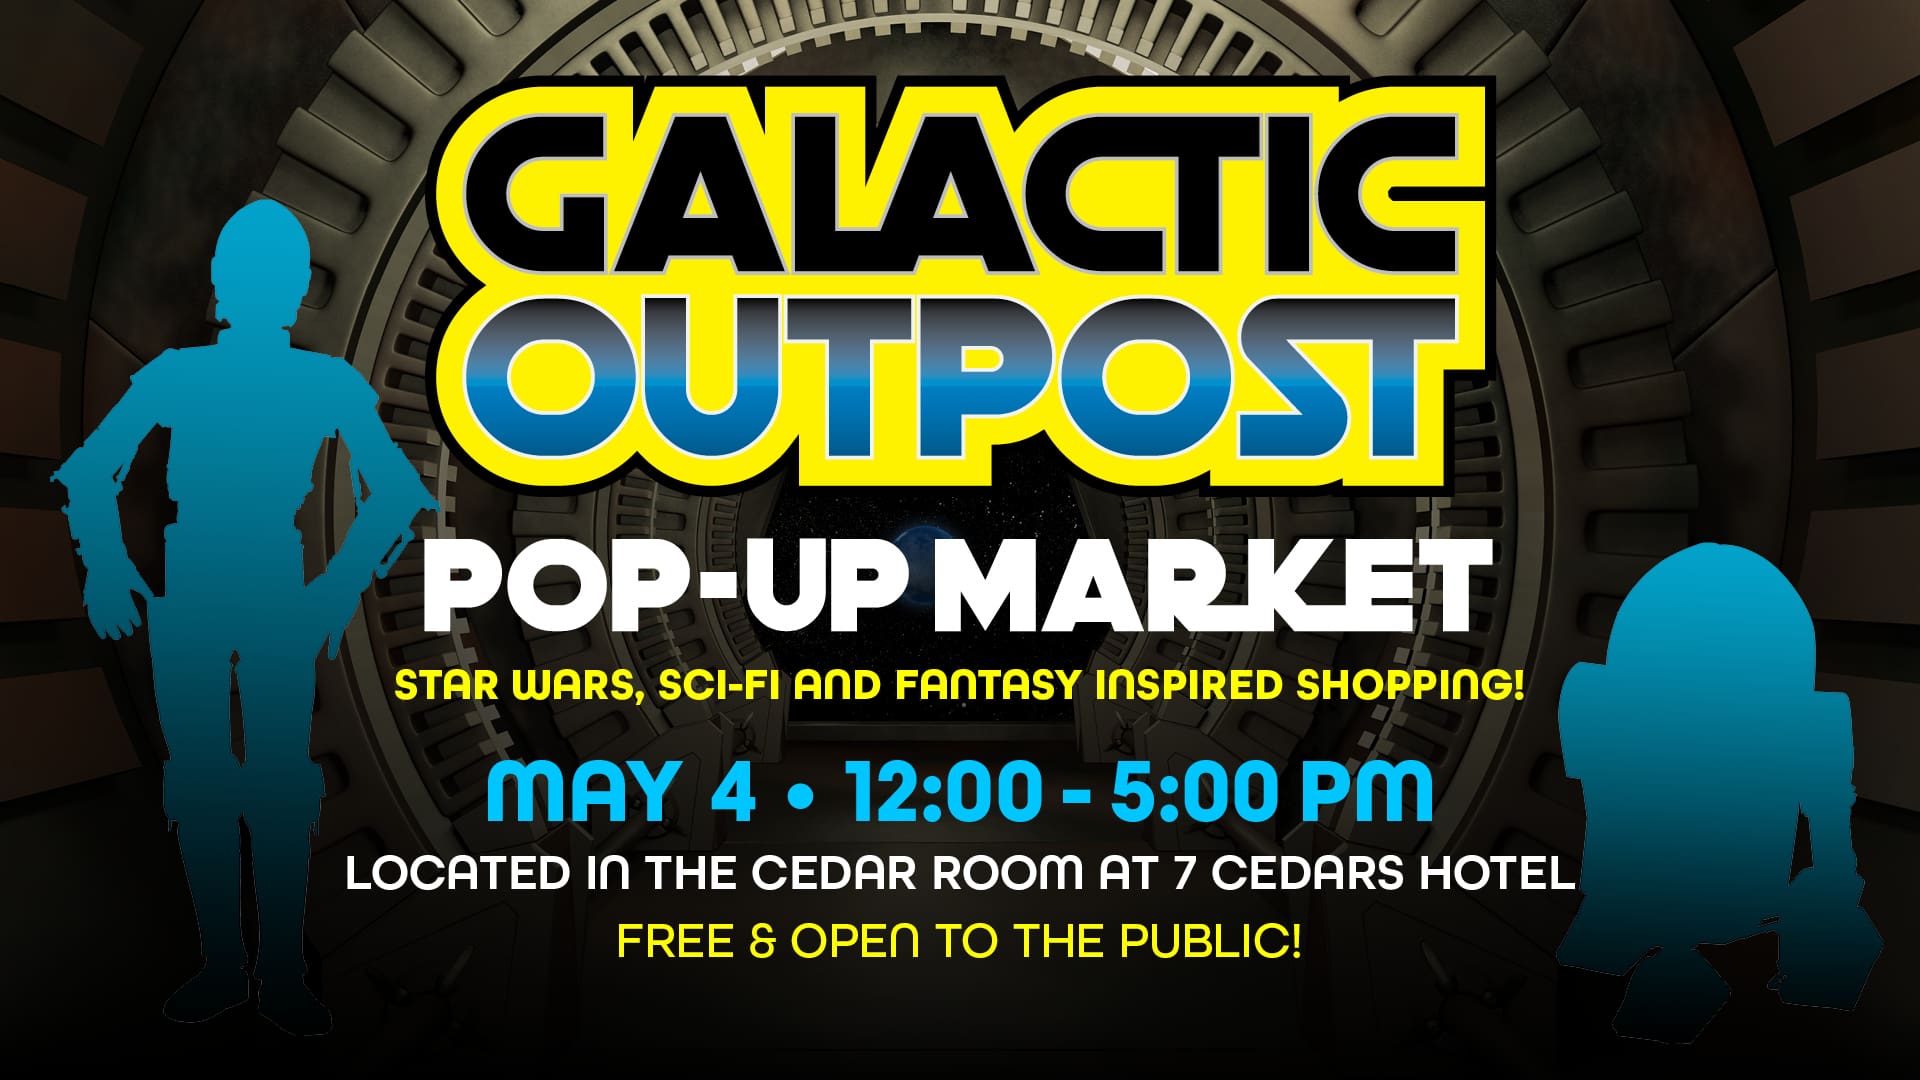 Galactic Outpost: Pop-Up Market